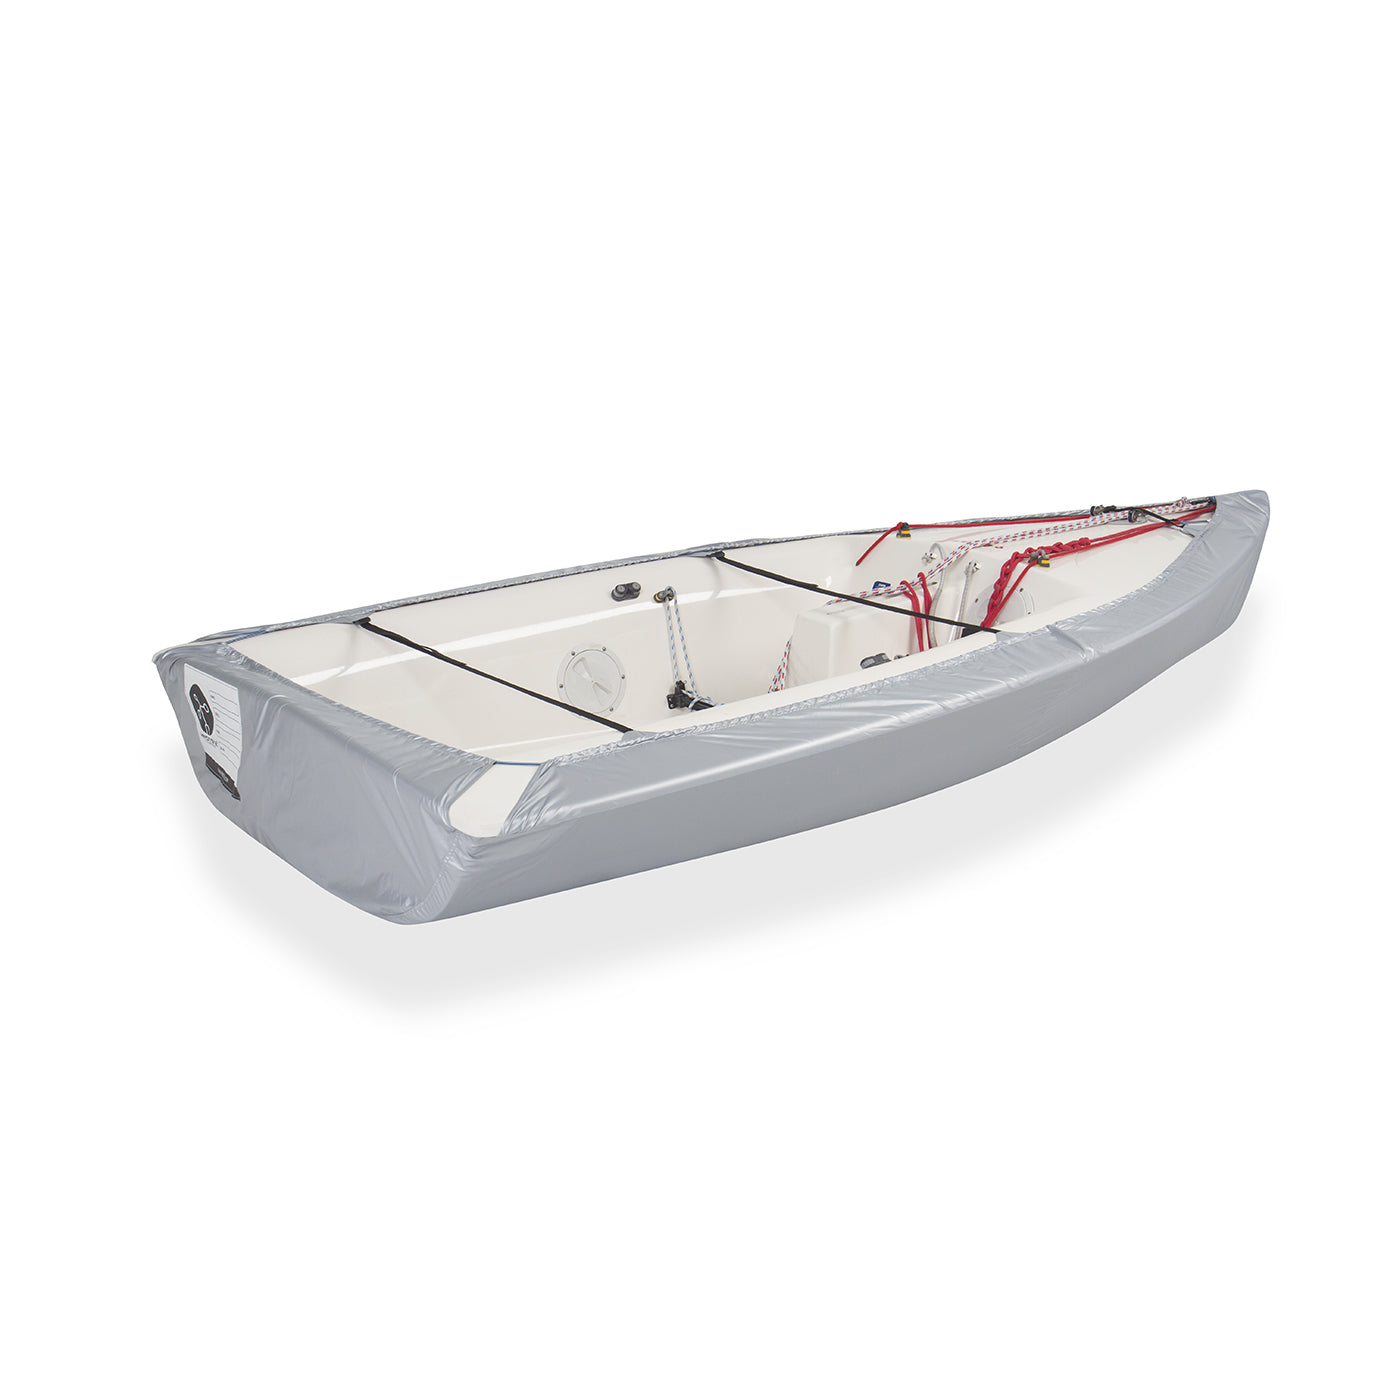 Knots12 high quality Zoom8 dinghy  bottom cover light silver. Material polyester. Colour: silver / light blue, orange welt. Reflective name tags. UV protection. EAN / GTIN code: 4744422010075,  made in Estonia/European Union.